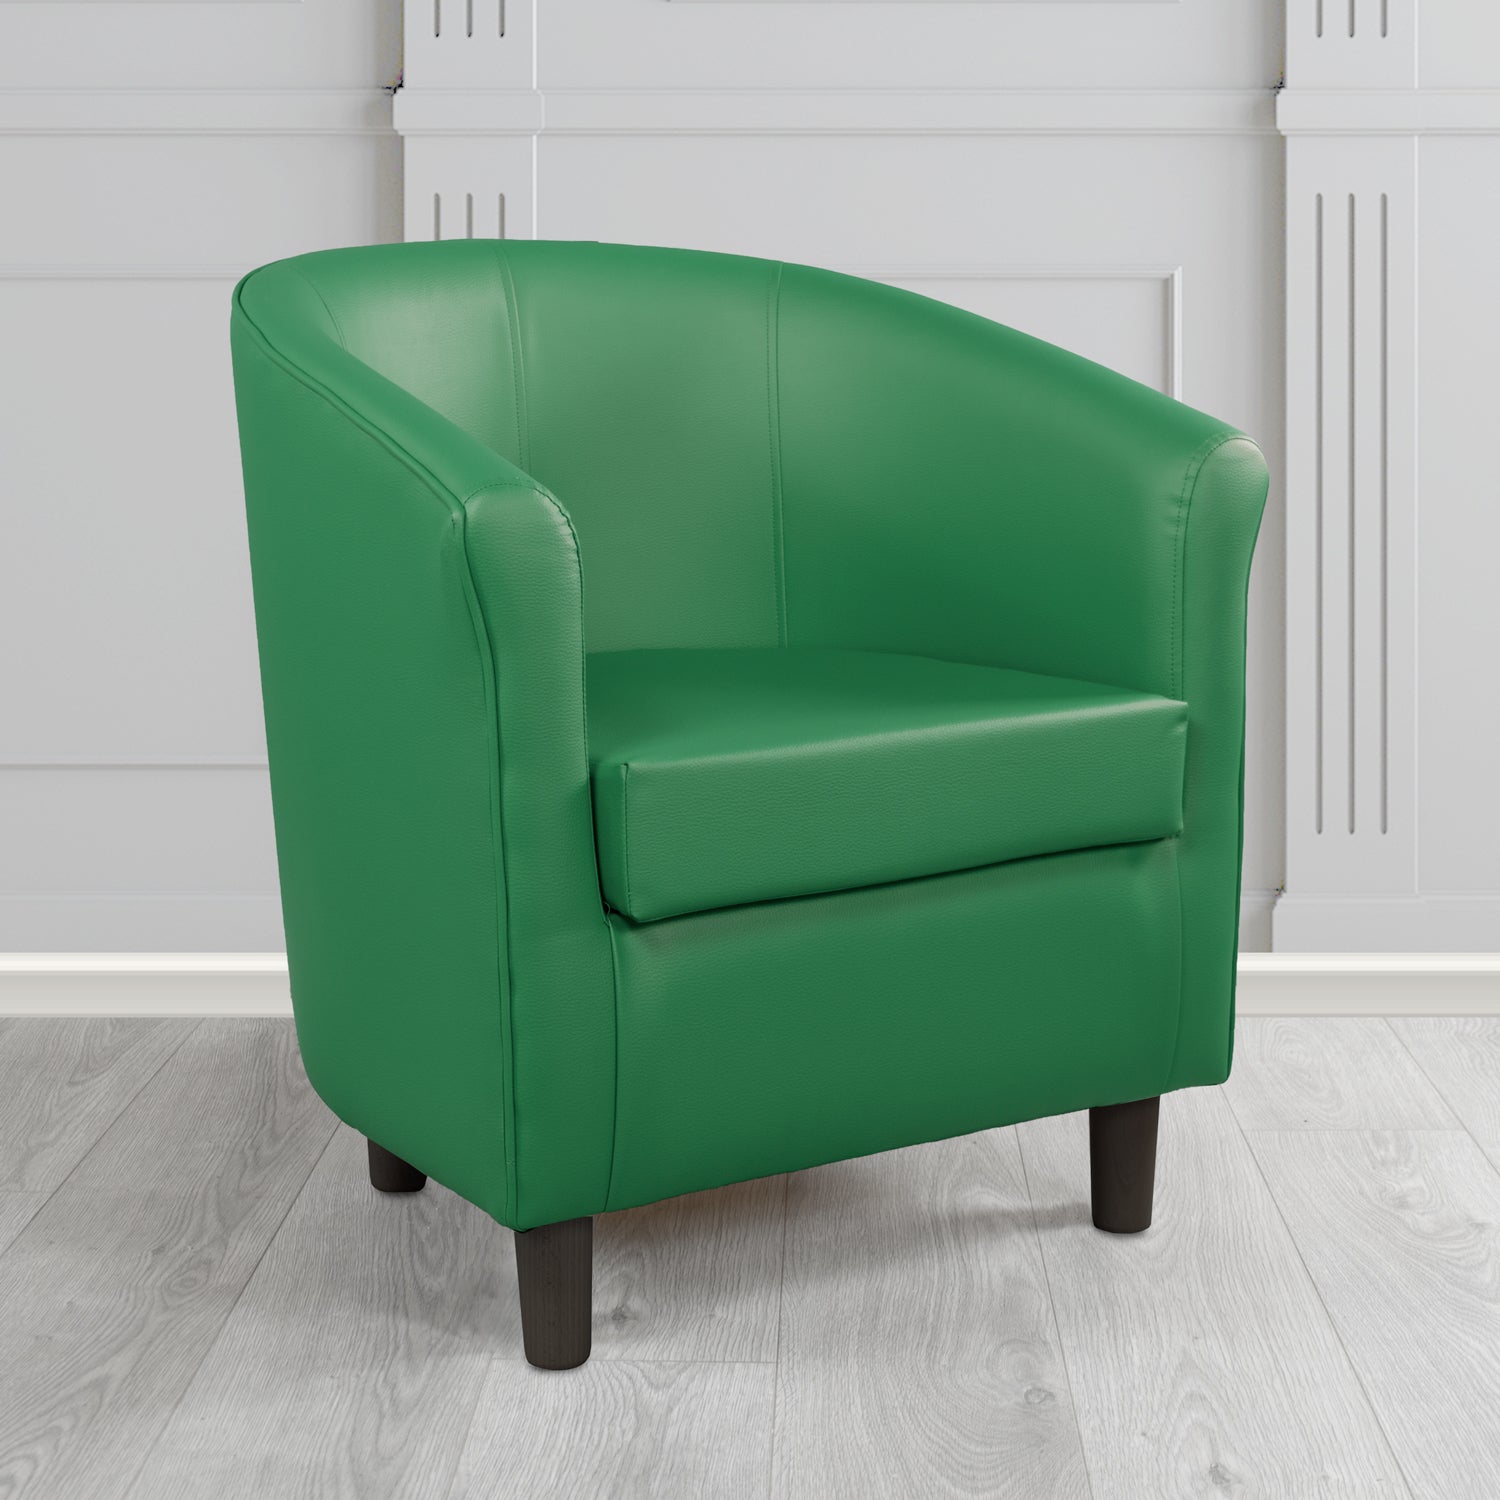 Tuscany Just Colour Laurel Antimicrobial Crib 5 Contract Faux Leather Tub Chair - The Tub Chair Shop